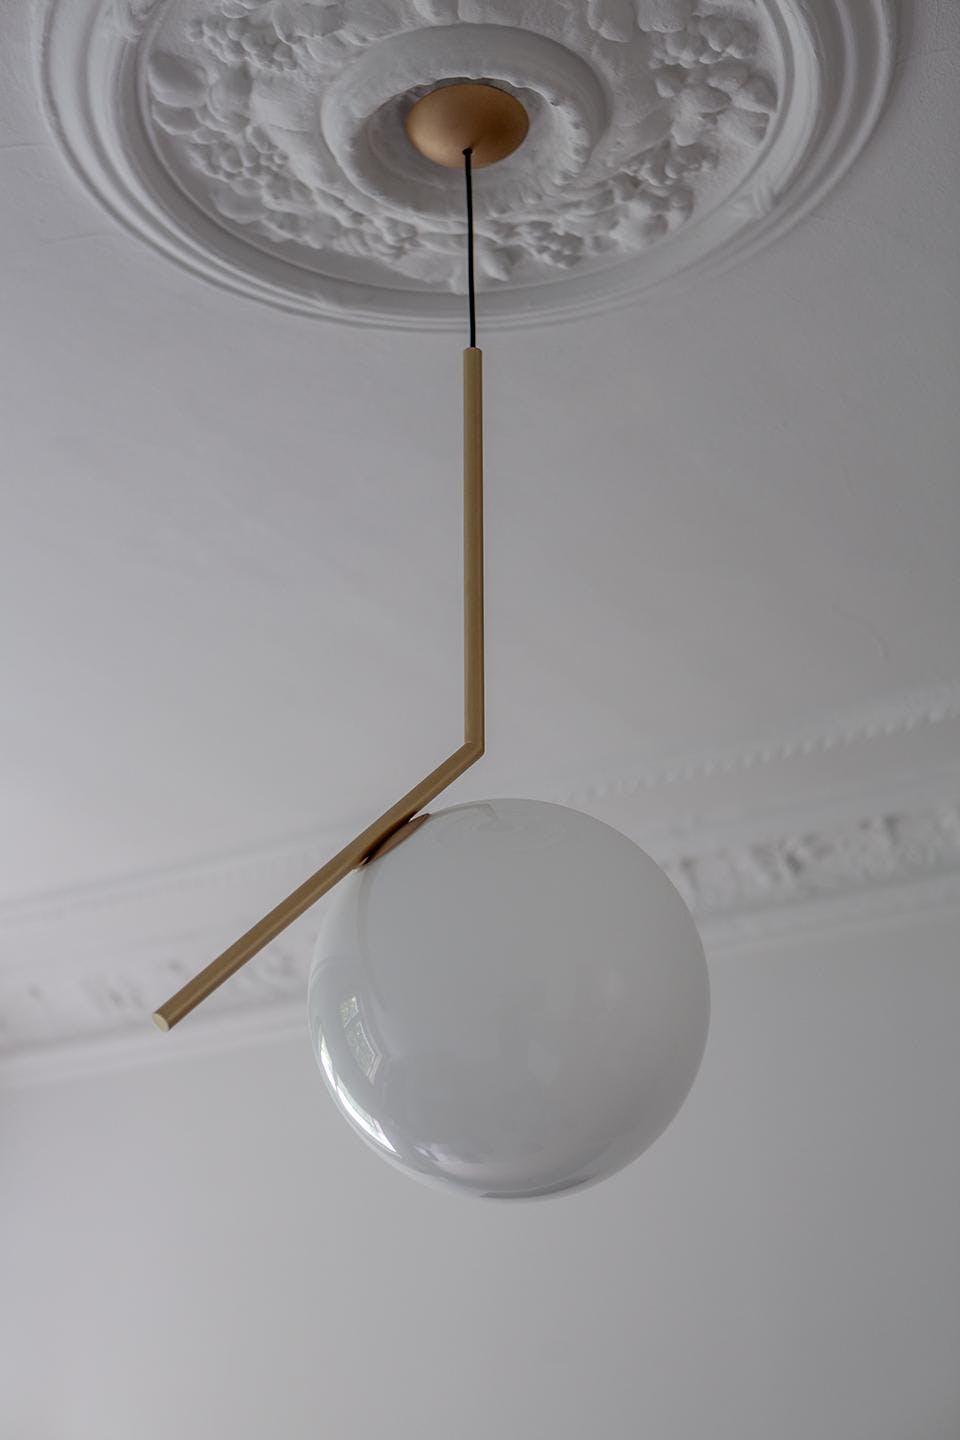 The image features a white ceiling with a large, round, and white light fixture hanging from it. The light fixture is suspended from a wooden pole, and it appears to be a chandelier. The ceiling is decorated with a white ceiling fan, which is also suspended from the ceiling. The fan is positioned towards the top of the ceiling, adding a touch of elegance and style to the room.